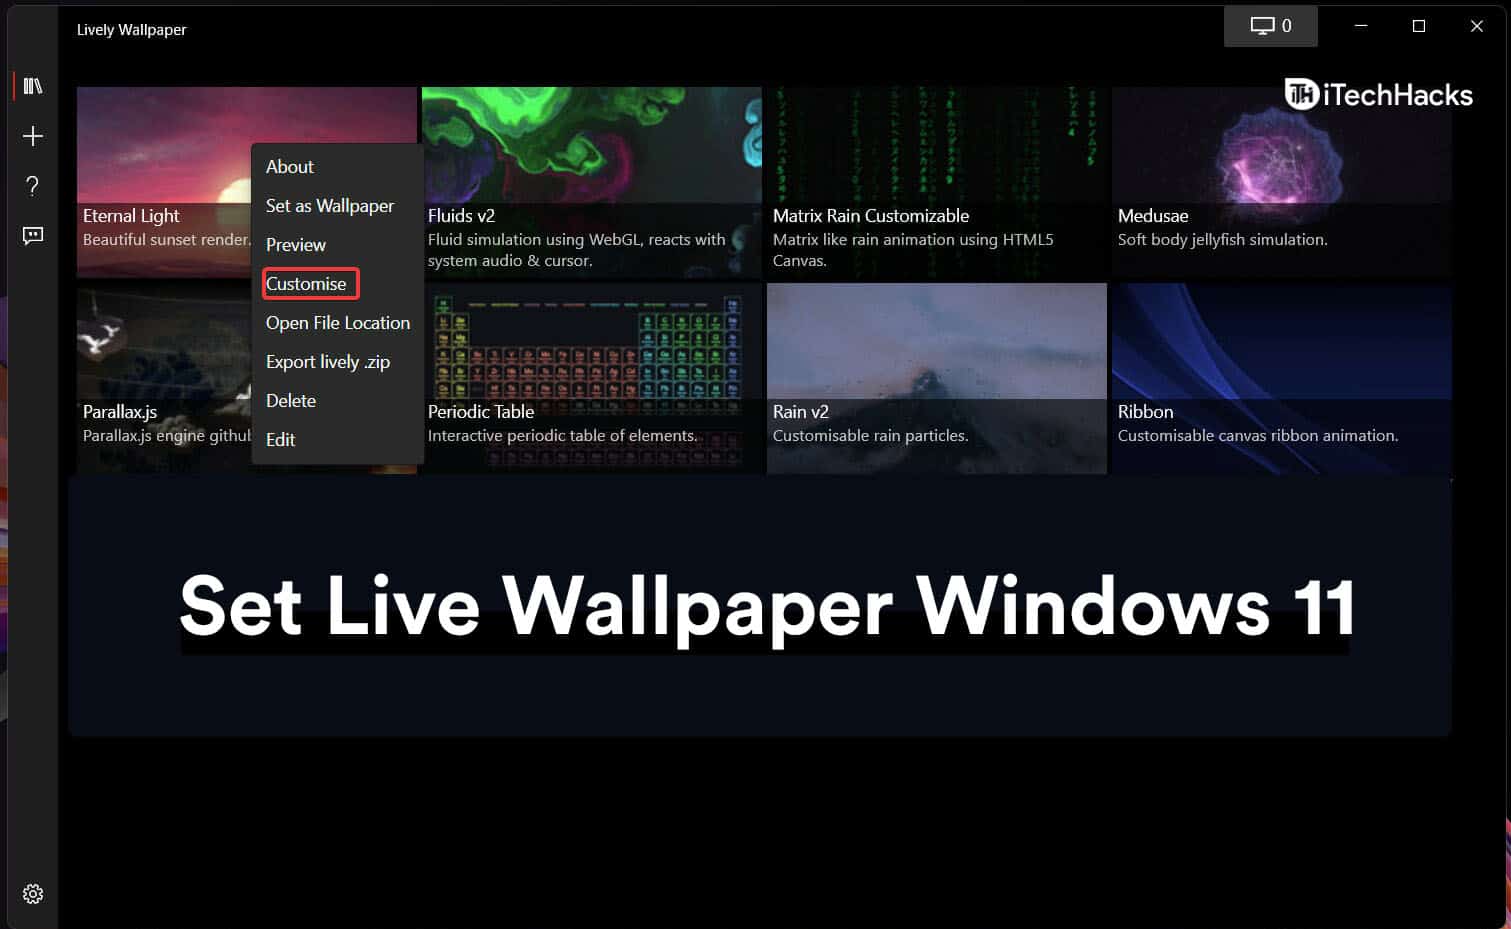 How to Set Lively Wallpaper on Windows 11